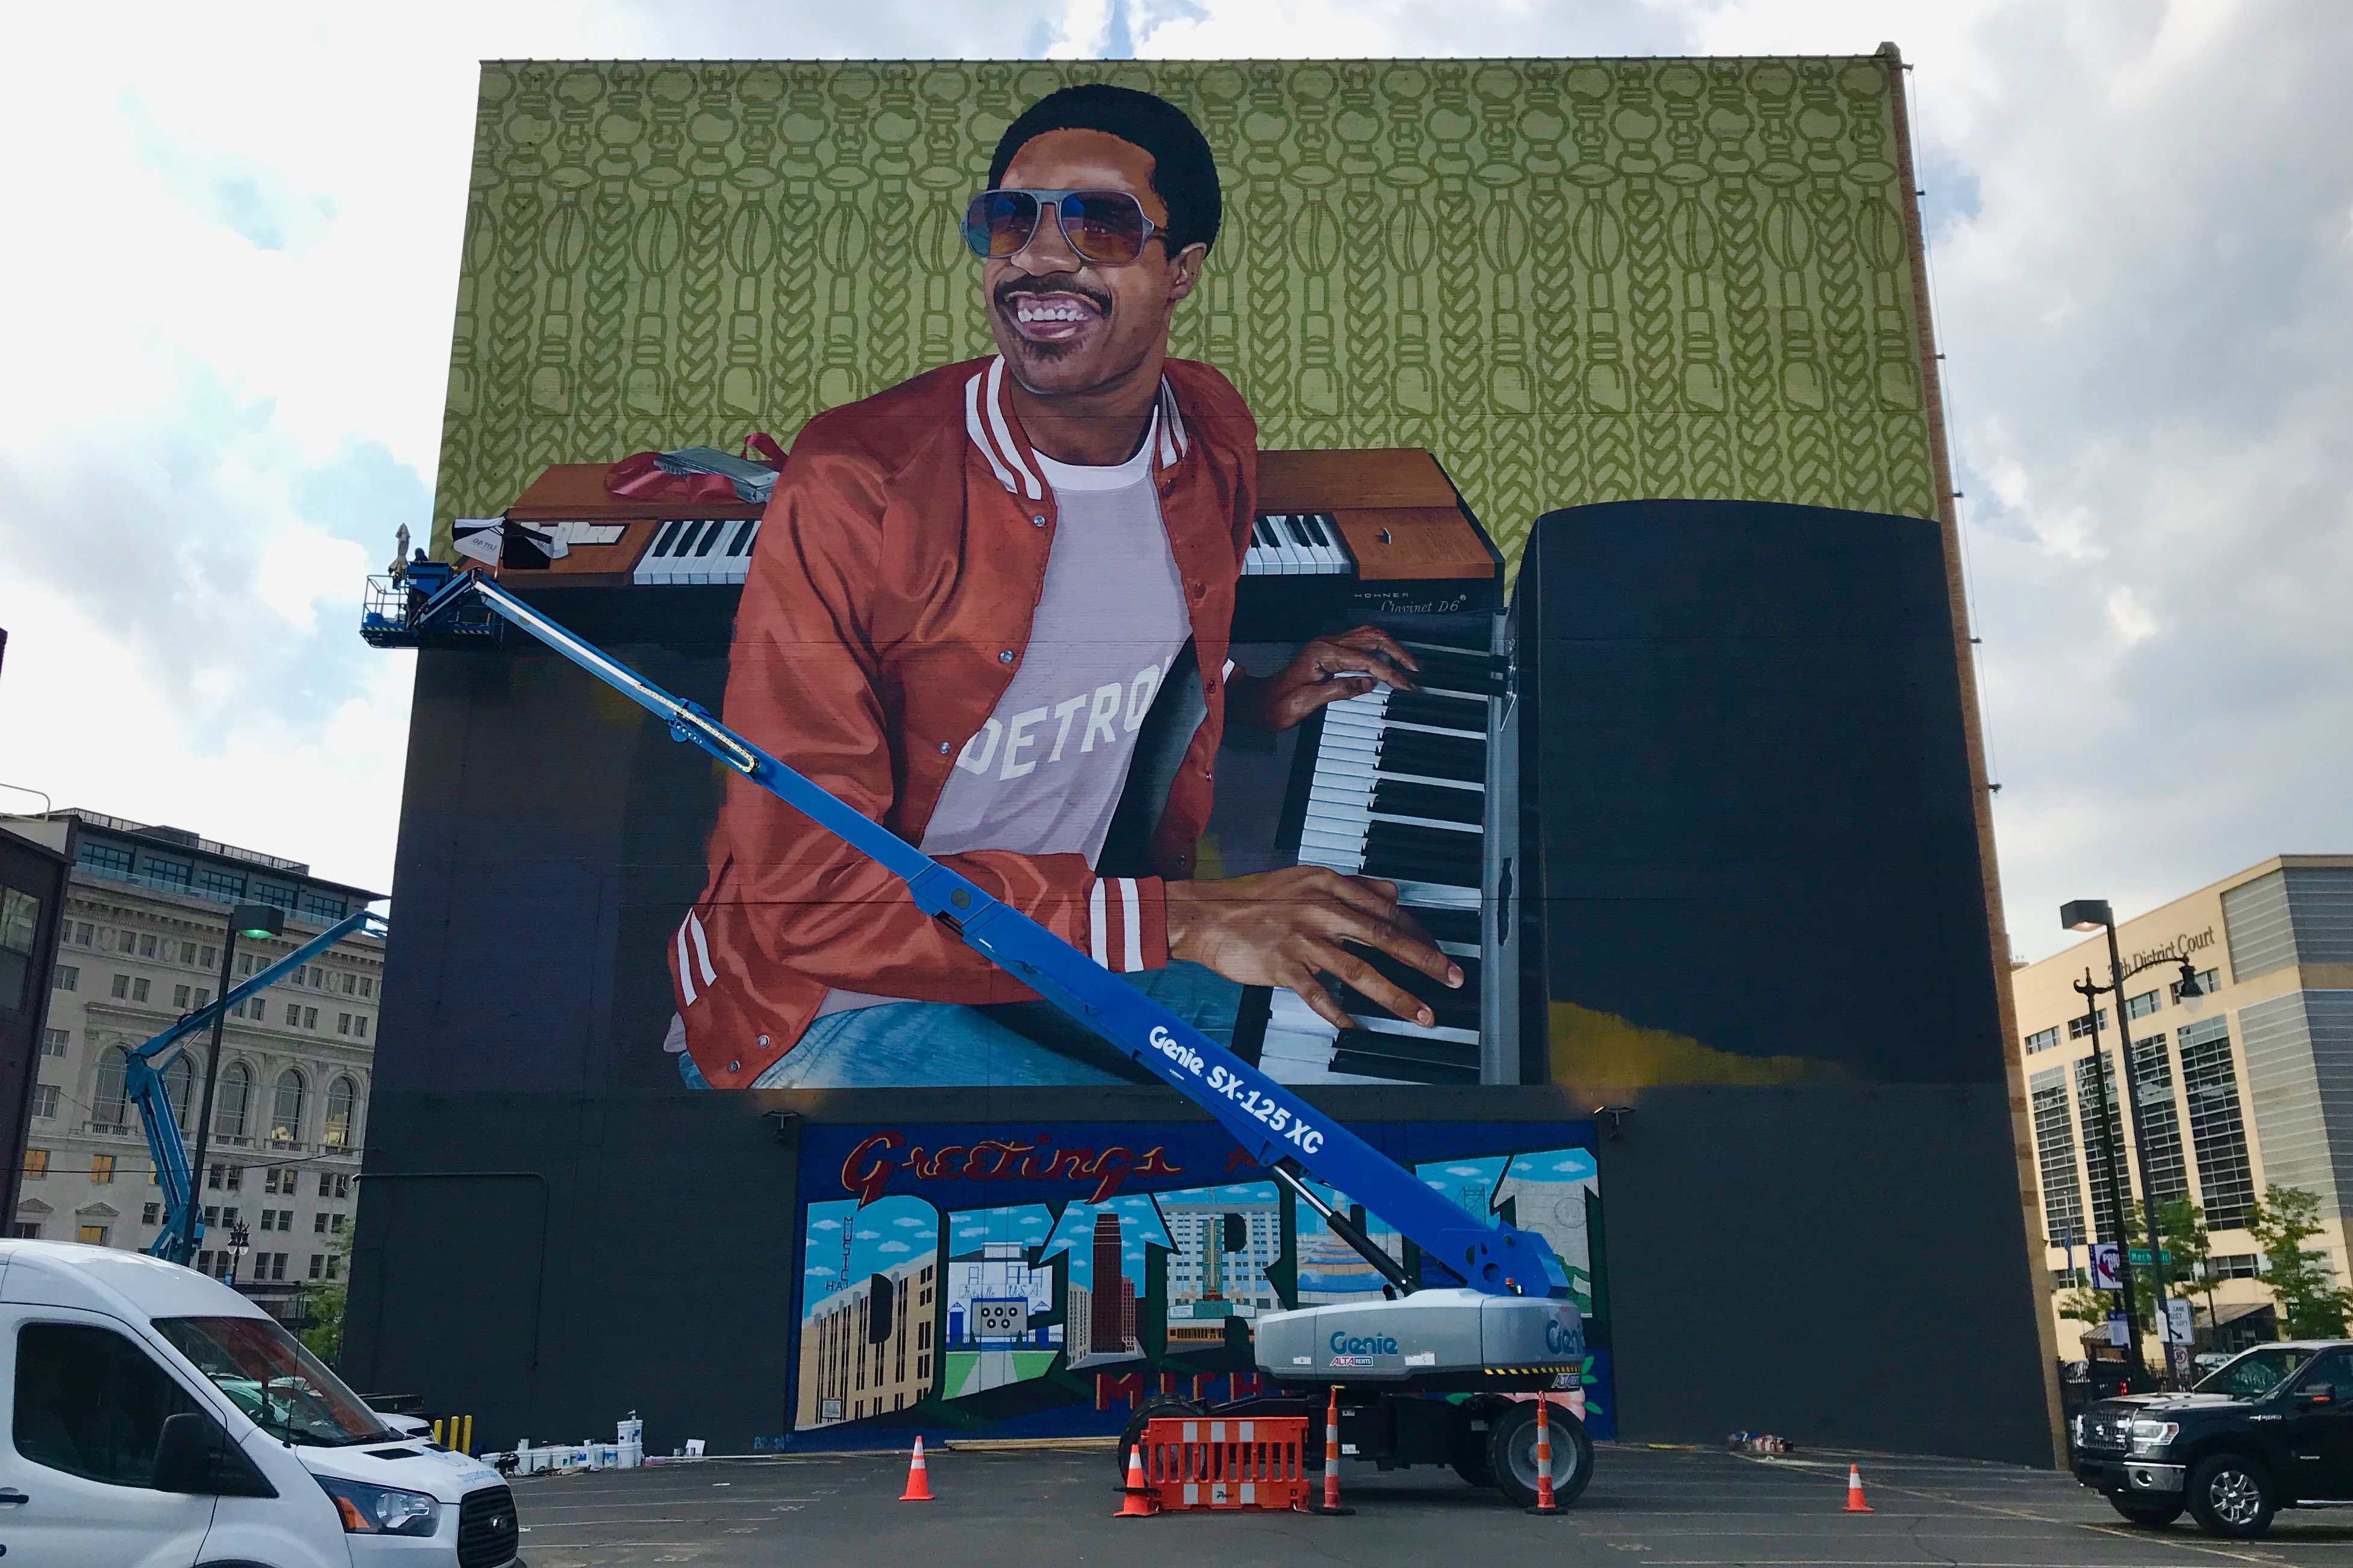 The side of a building. There is a mural depicting Stevie Wonder on the side of the building.